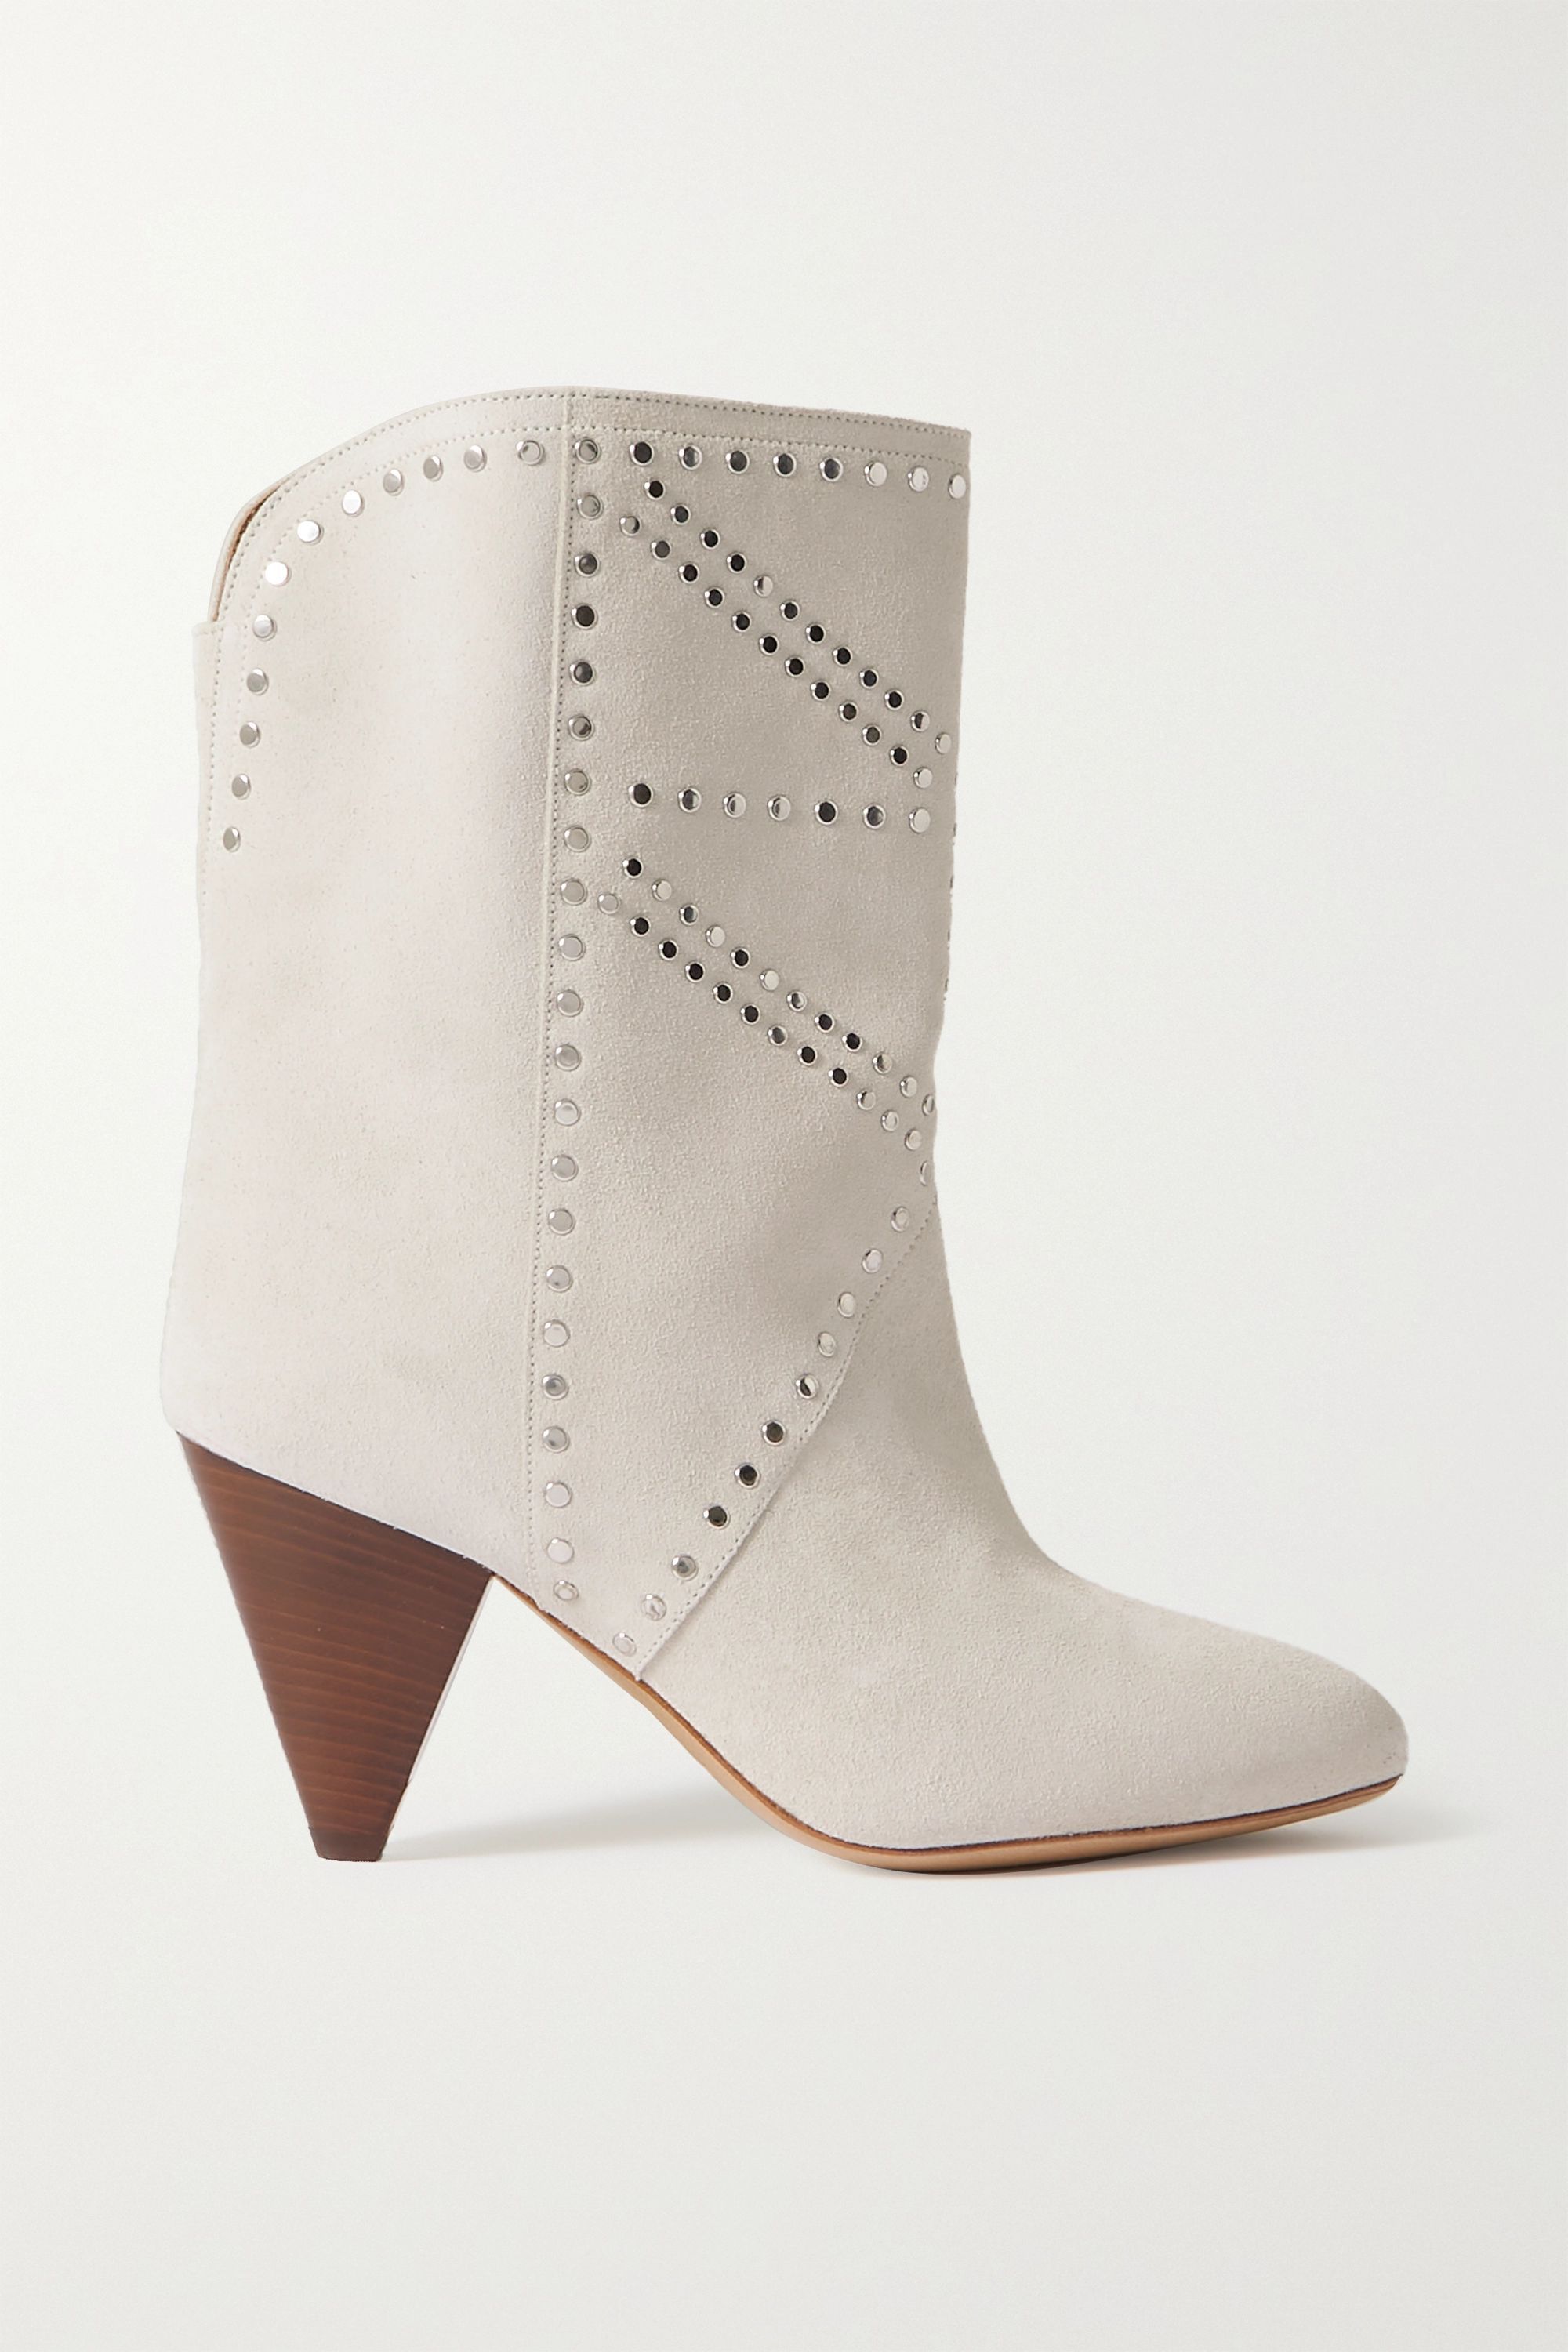 Off-white Deezia studded suede ankle boots | ISABEL MARANT | NET-A-PORTER | NET-A-PORTER (US)